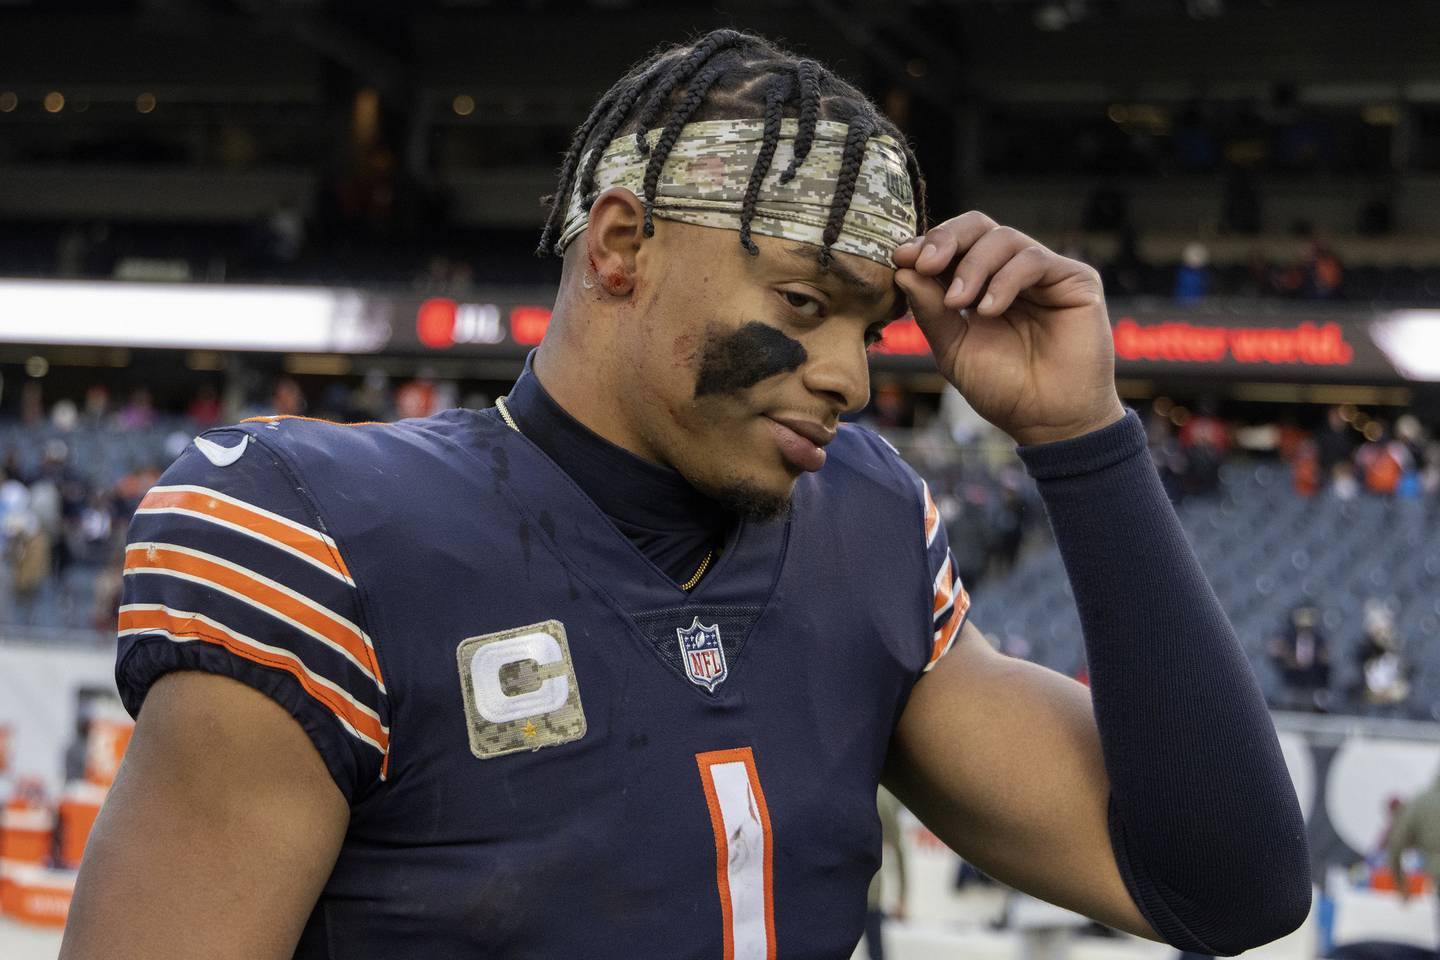 Bears quarterback Justin Fields leaves the field with a bloody ear after his team’s 31-30 loss to the Lions on Nov. 13, 2022.